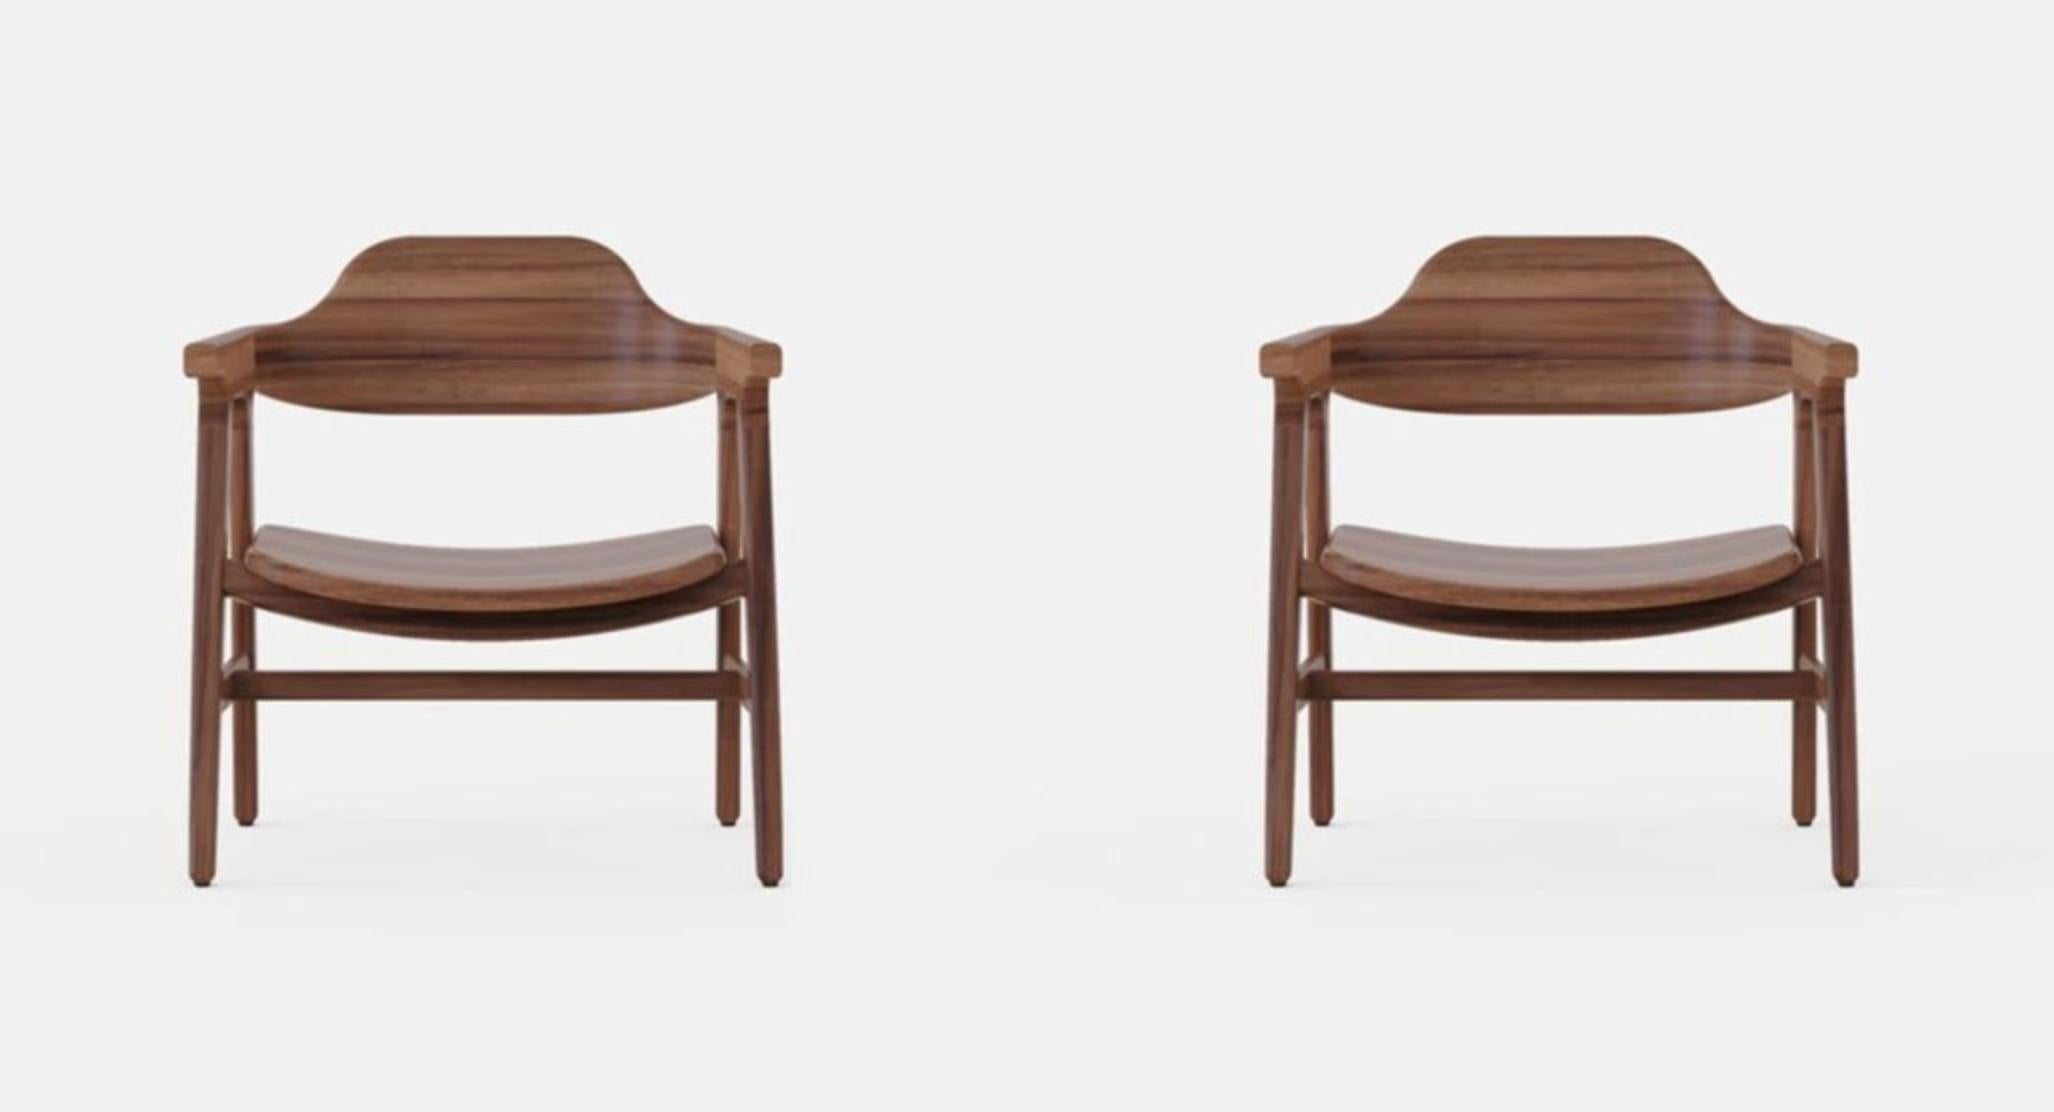 Set of 2 Sensato Armchair by Sebastián Angeles
Material: Walnut
Dimensions: W 45 x D 40 x 100 cm
Also Available: Other colors available,

The love of processes, the properties of materials, details and concepts make Dorica Taller a study not